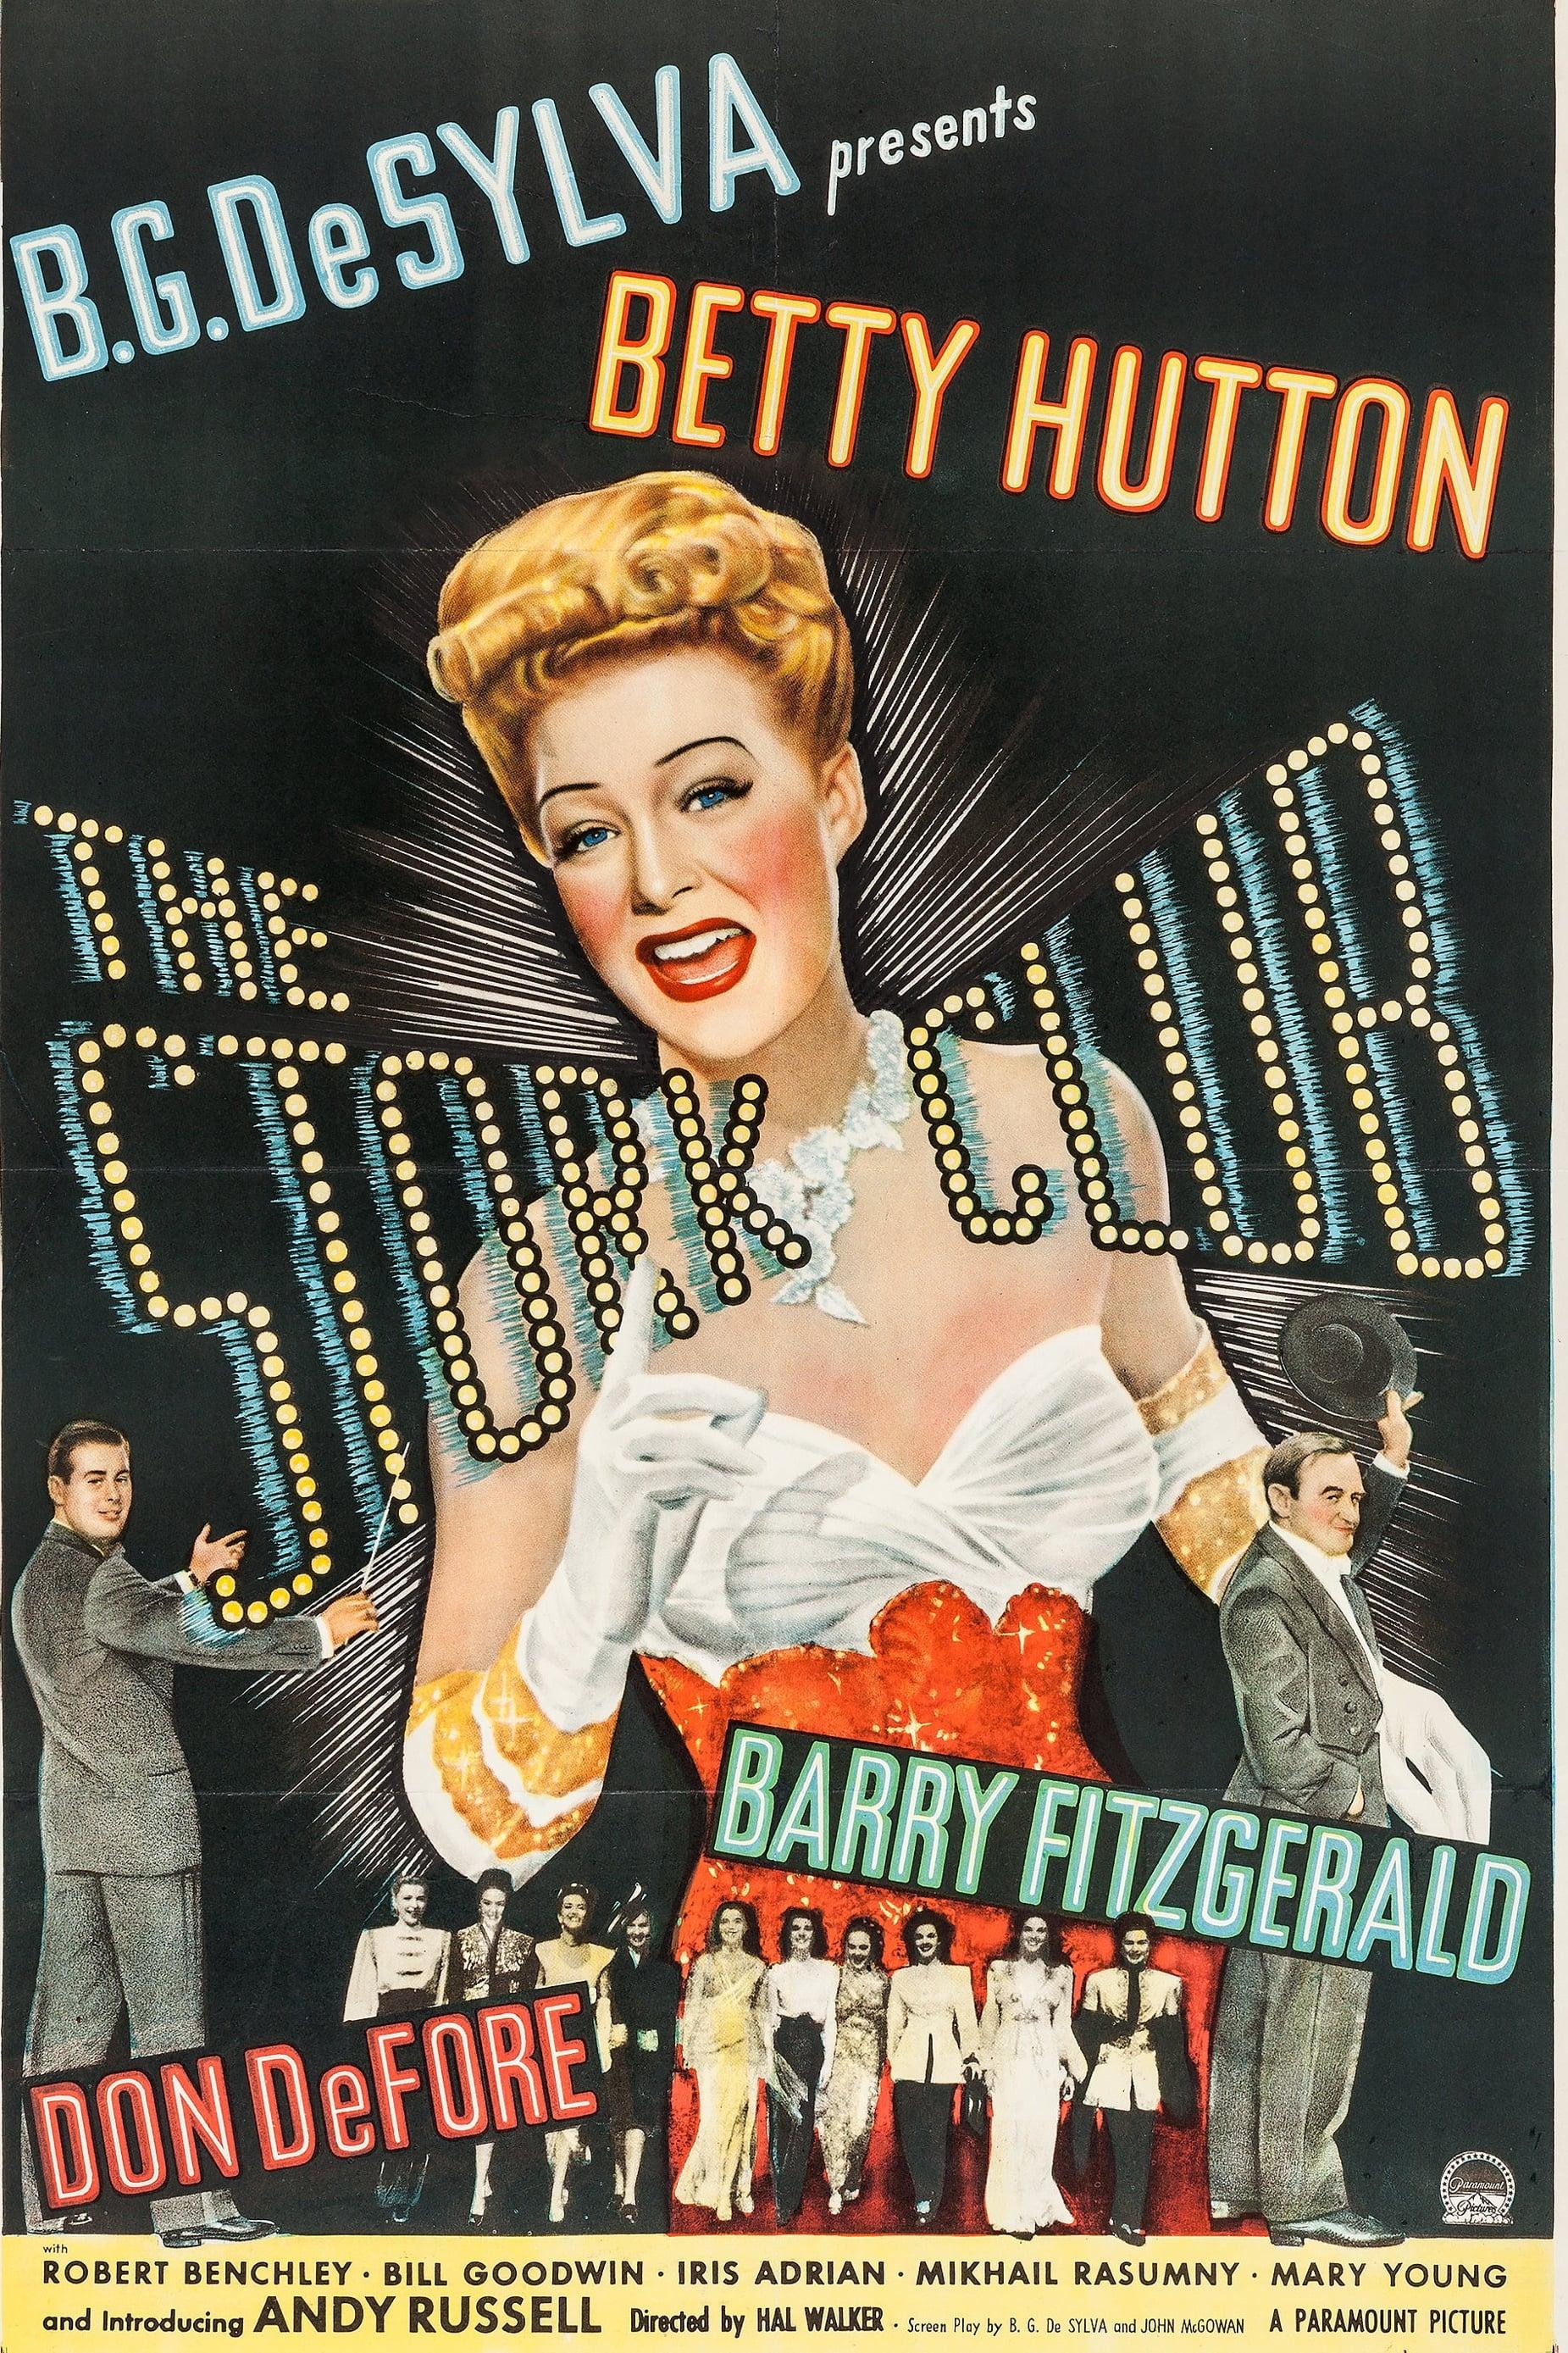 The Stork Club poster